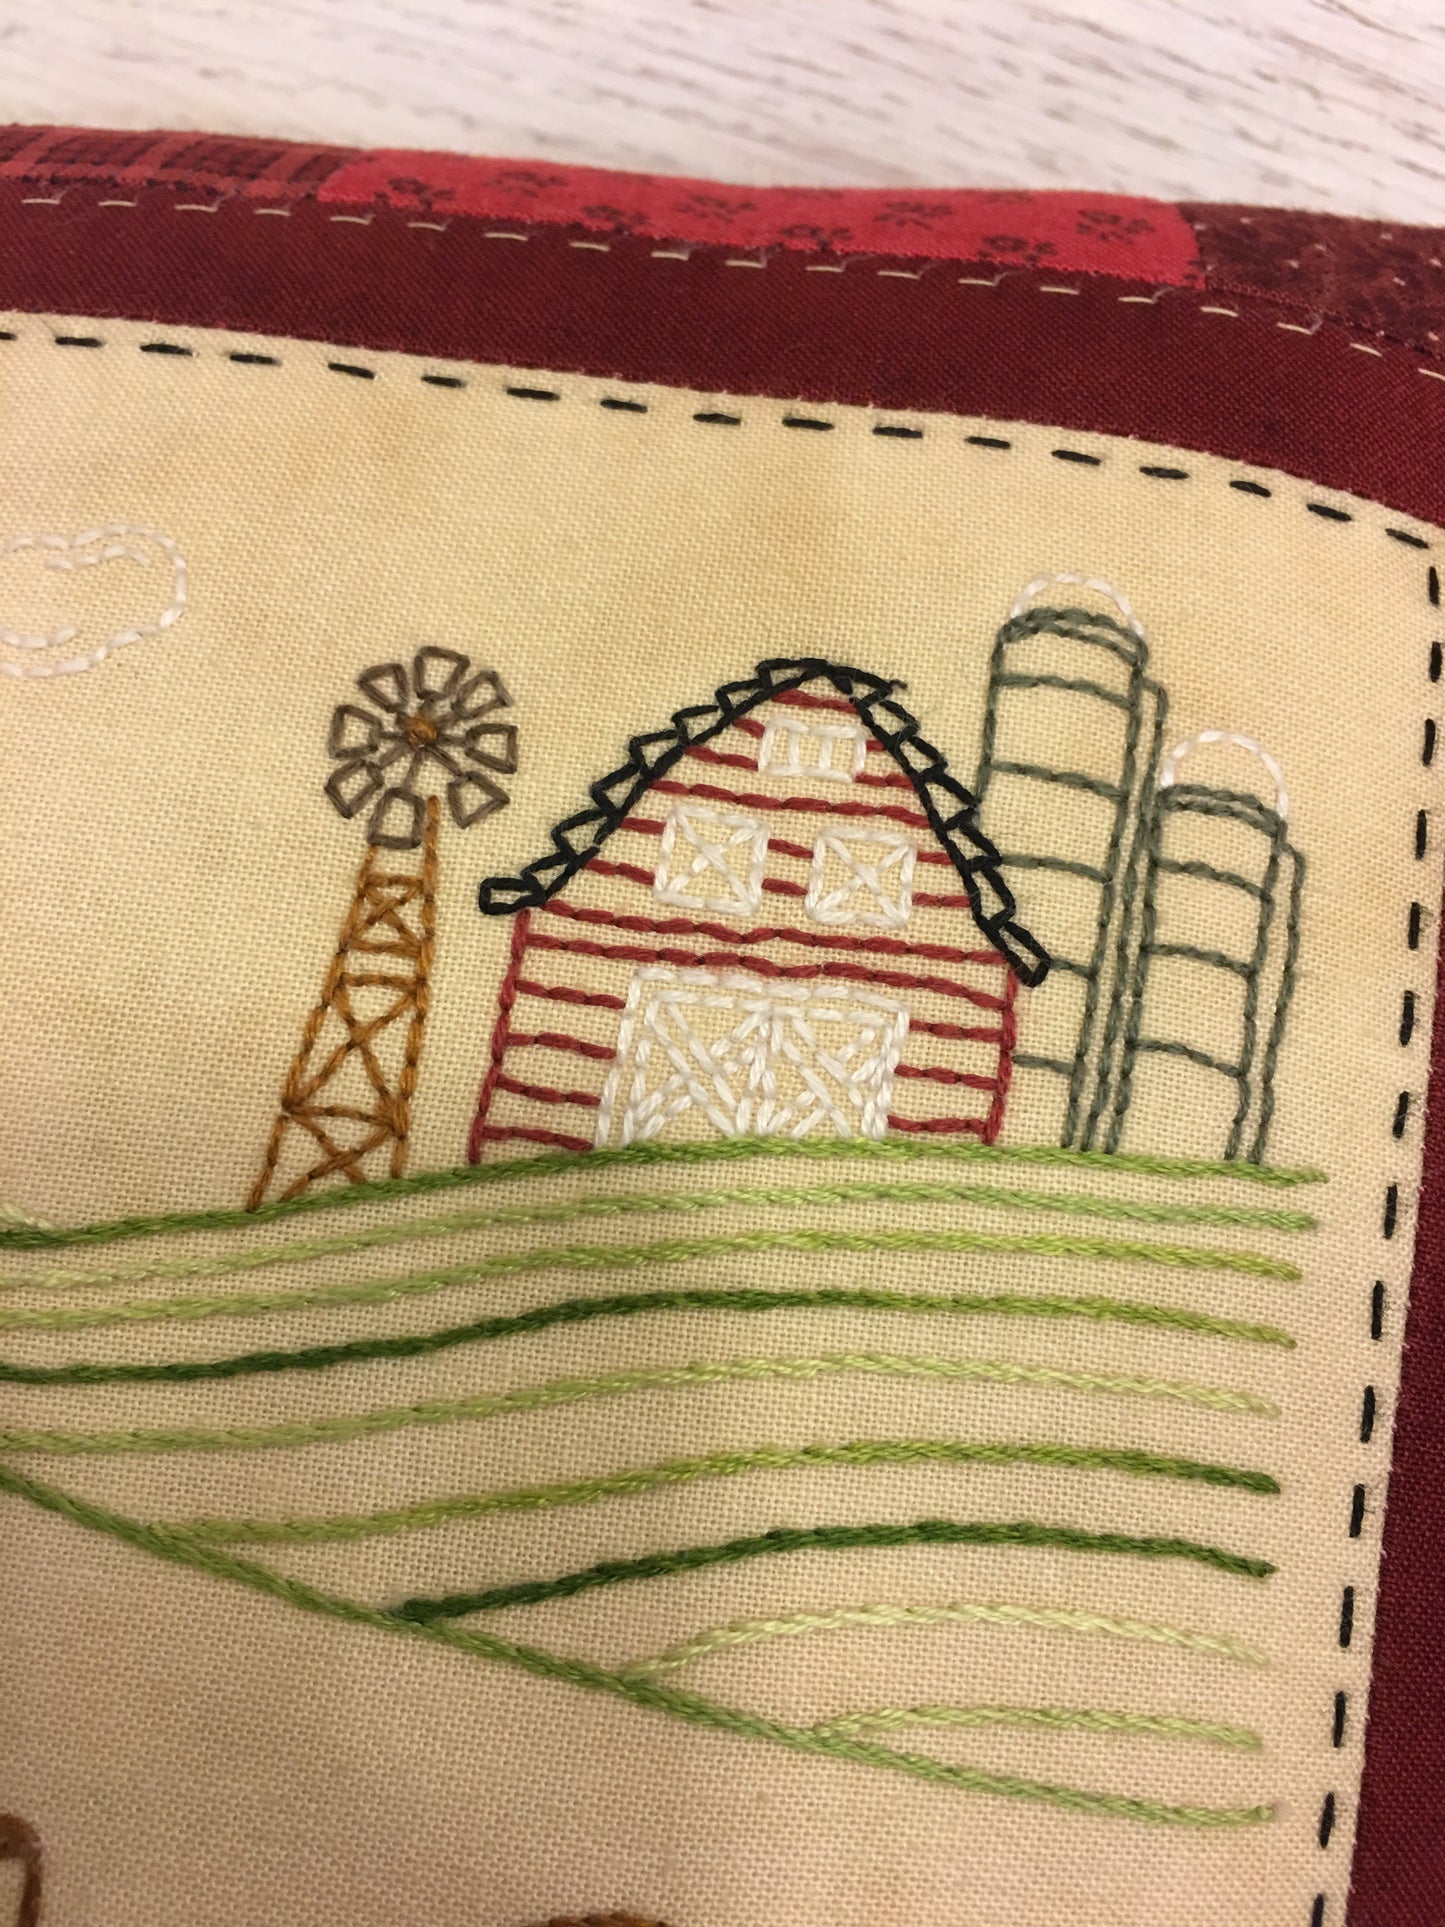 Pattern #056 - Down on the Farm